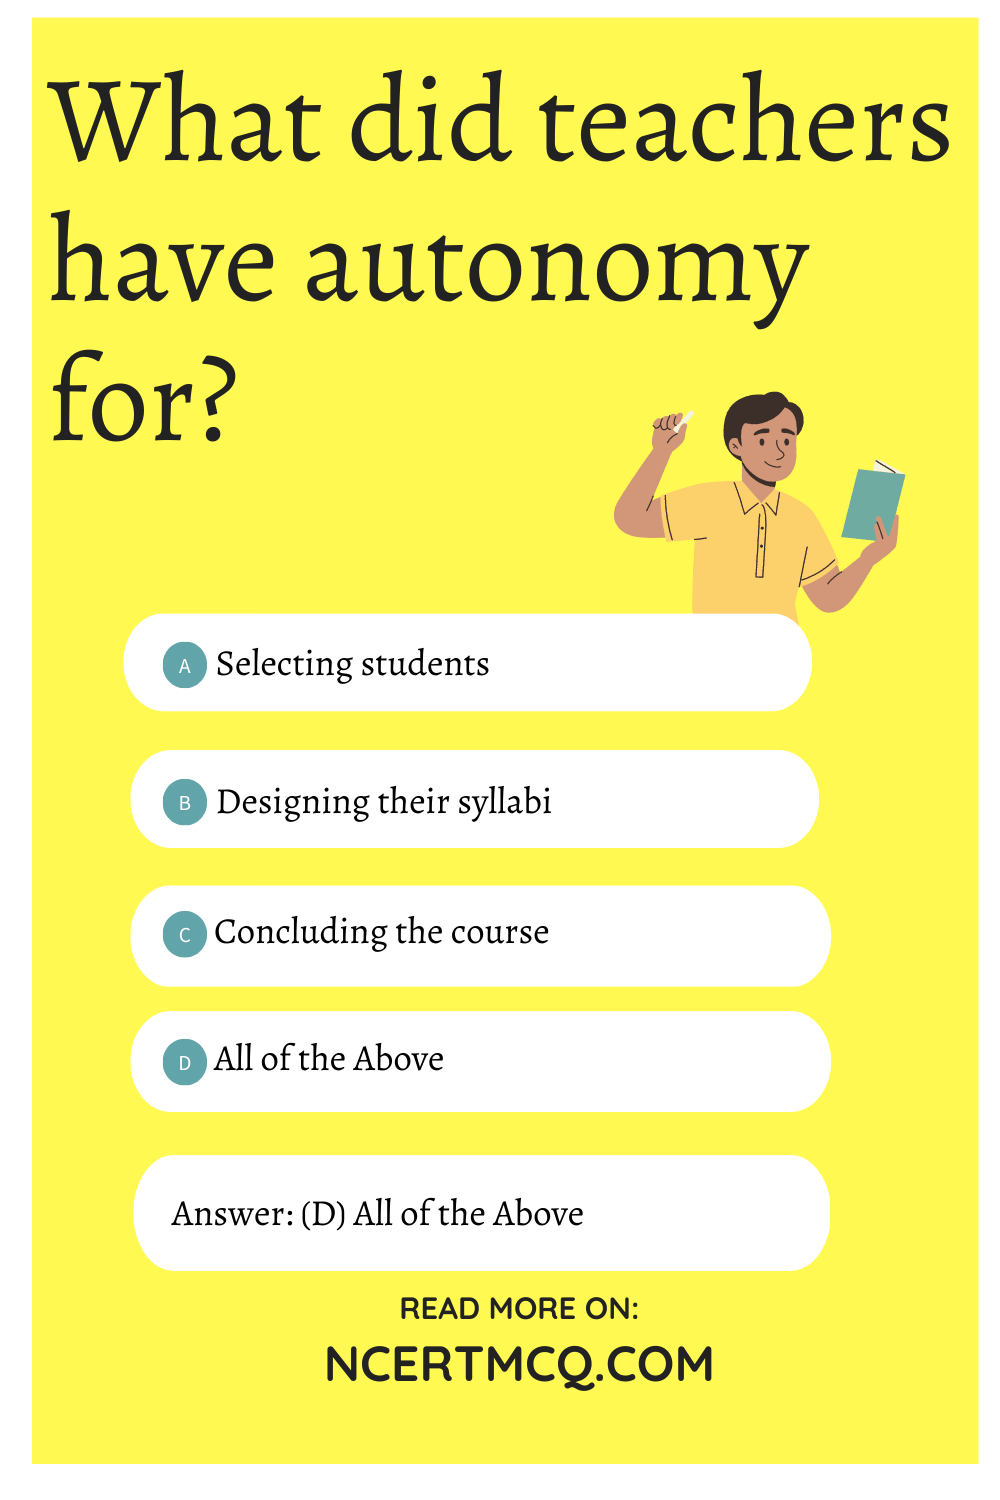 What did teachers have autonomy for?